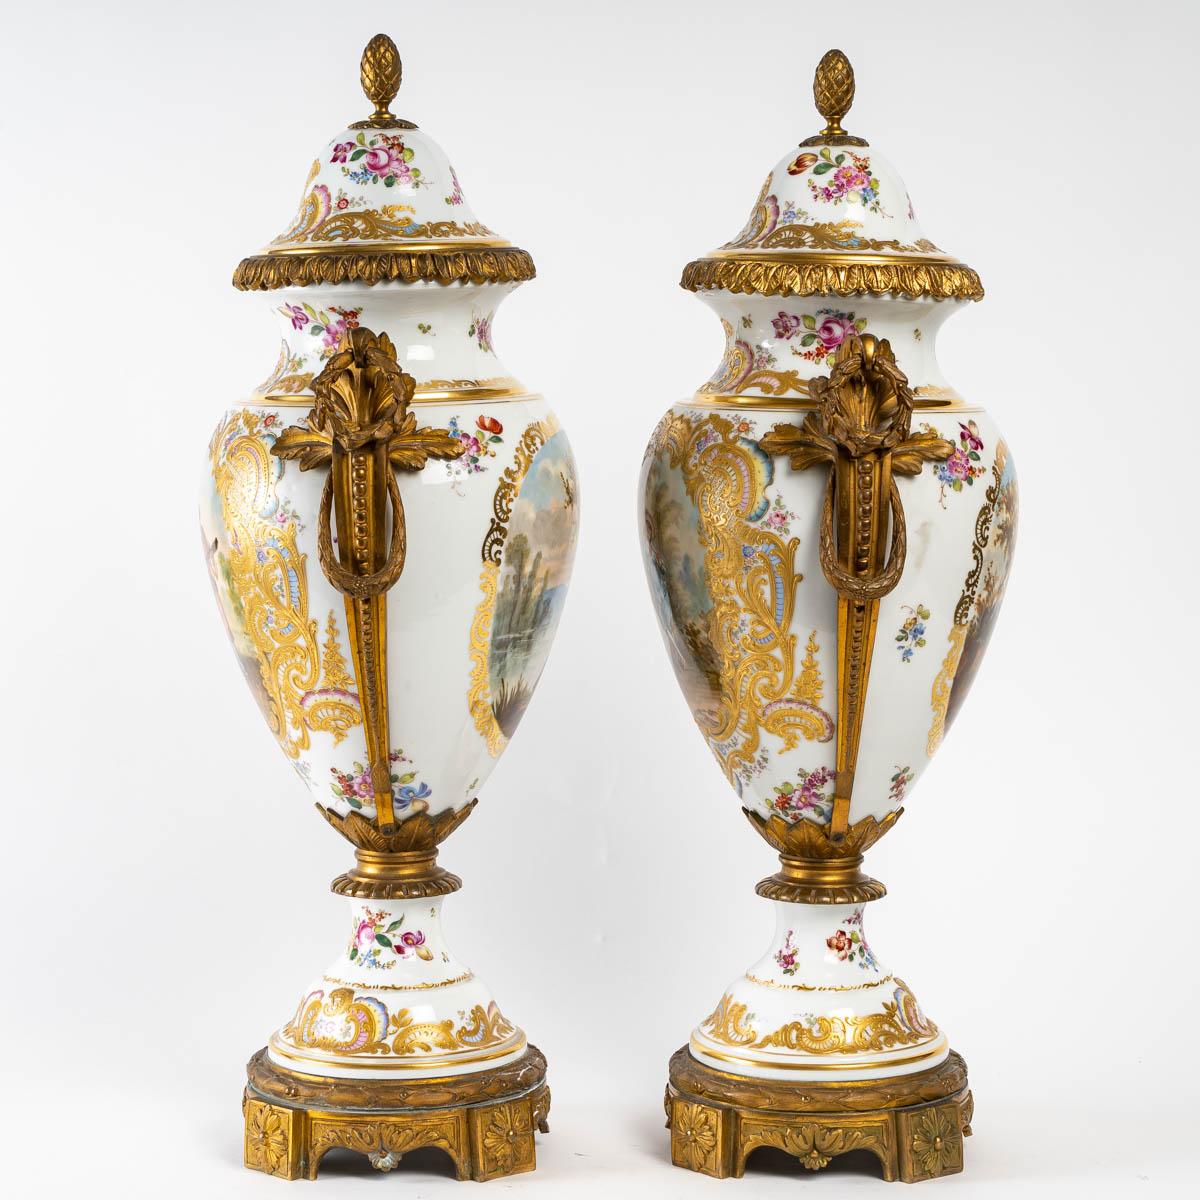 Late 19th Century Pair of Sèvres porcelain covered vases, 19th century